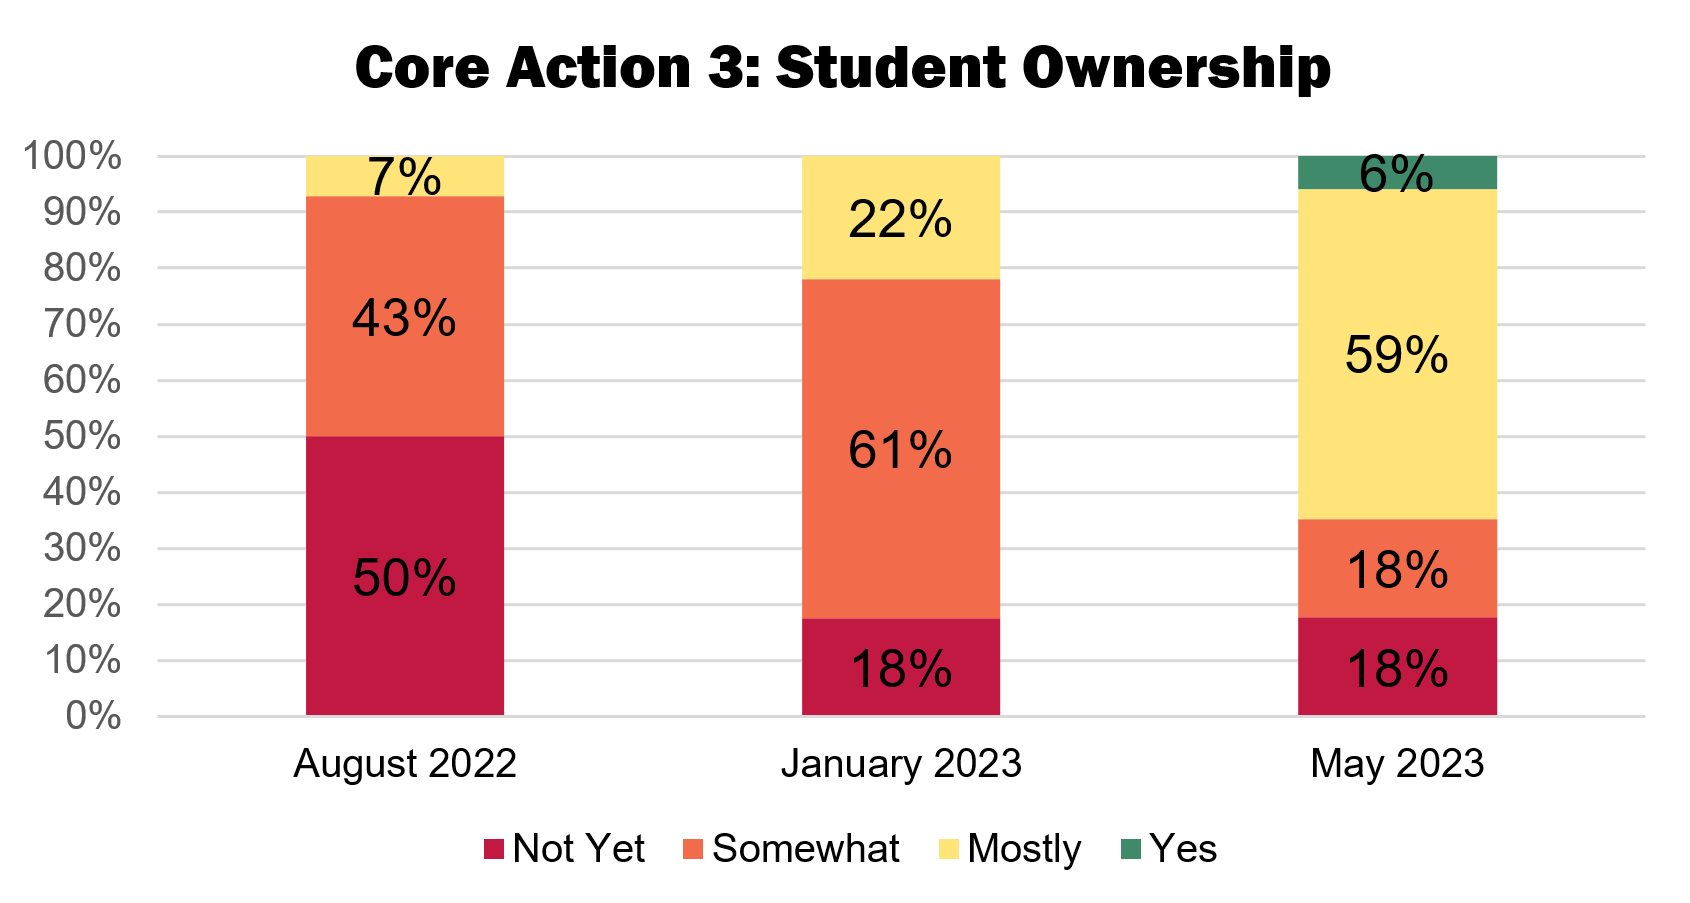 Stacked bar chart showing improvements over time in student ownership.